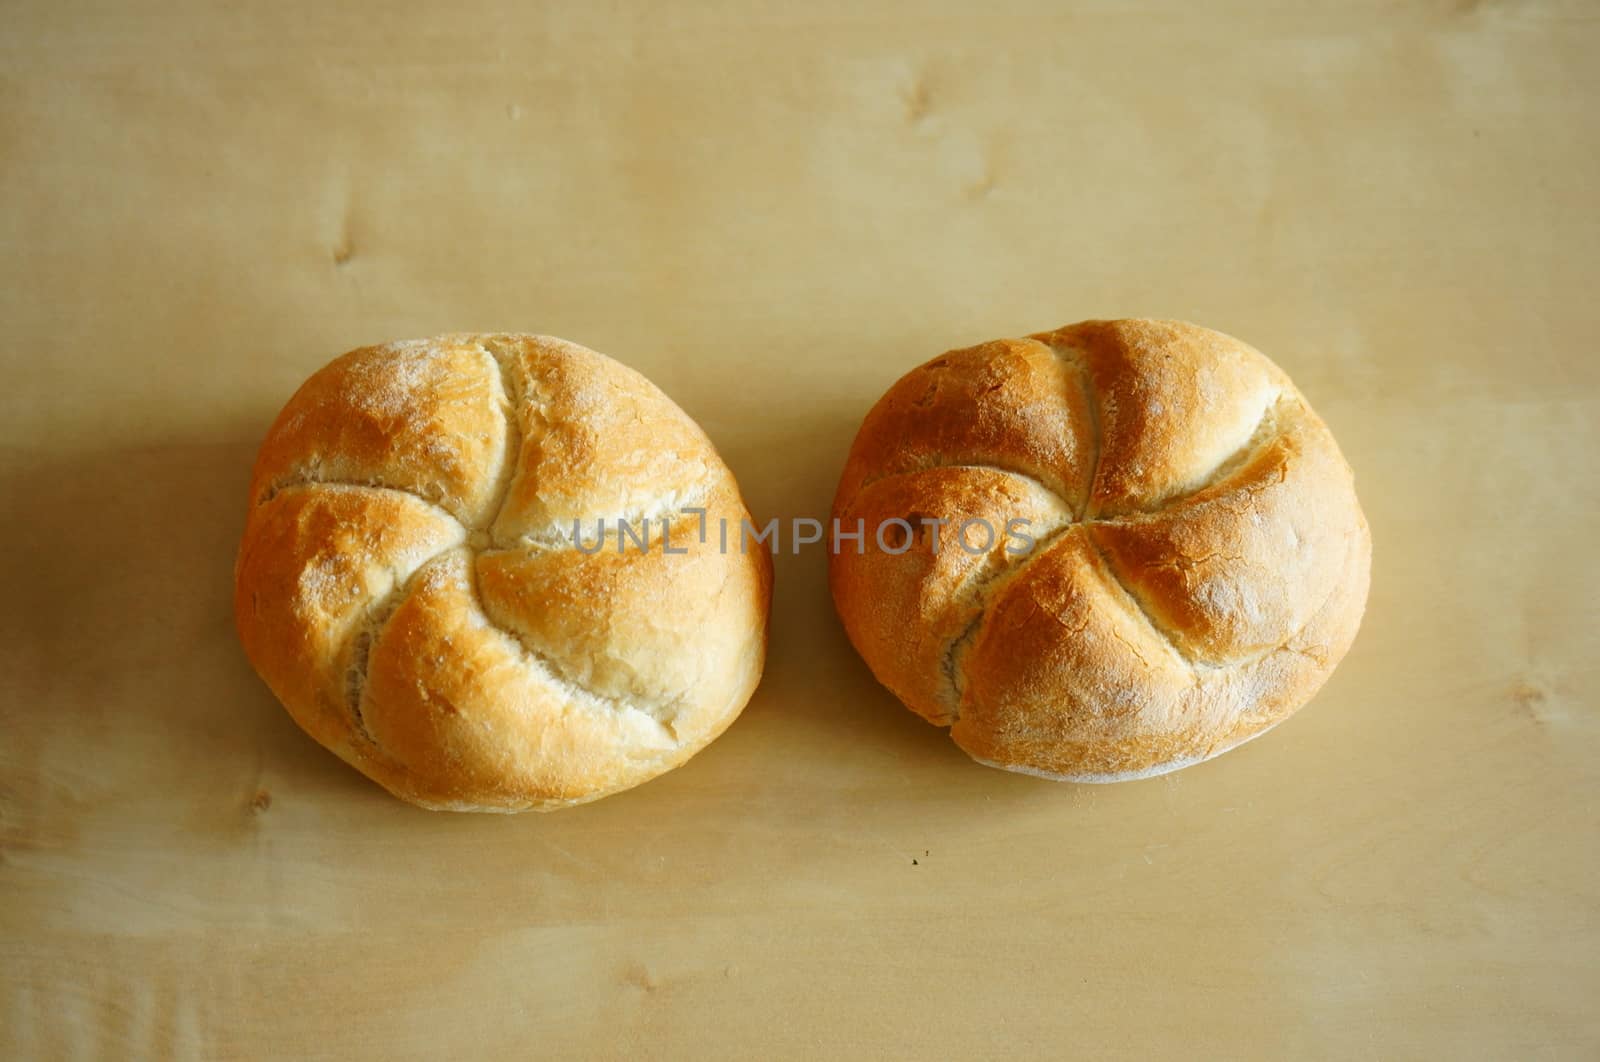 Two whole breads on wooden background